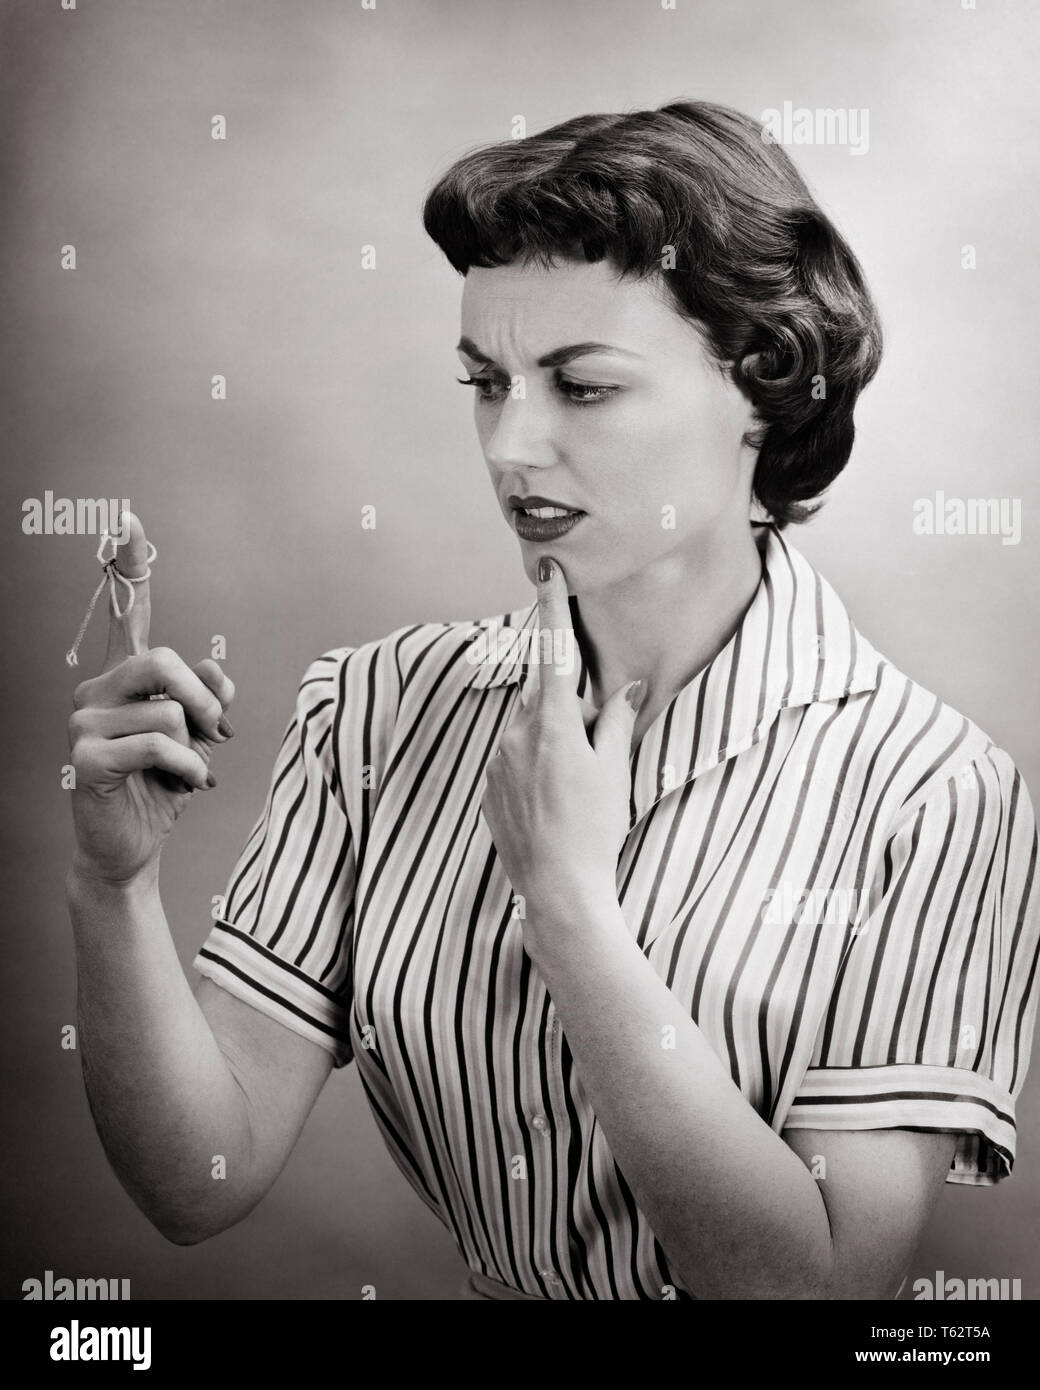 1950s FORGETFUL CONFUSED WOMAN HOUSEWIFE TRYING TO REMEMBER SOMETHING LOOKING AT REMINDER STRING TIED ON FINGER - bx016692 CAM001 HARS B&W PUZZLED SADNESS HOMEMAKER THOUGHT FORGET HOMEMAKERS STRATEGY FORGETFUL IDEA REMEMBER TRYING THINK CAM001 AT ON TO HOUSEWIVES PONDERING REMINDER CONNECTION CONCEPTUAL FORGOTTEN REMEMBERING SOMETHING FAILURE FORGETTING IDEAS MID-ADULT MID-ADULT WOMAN SOLUTIONS TECHNIQUE BLACK AND WHITE CAUCASIAN ETHNICITY FAIL OLD FASHIONED Stock Photo